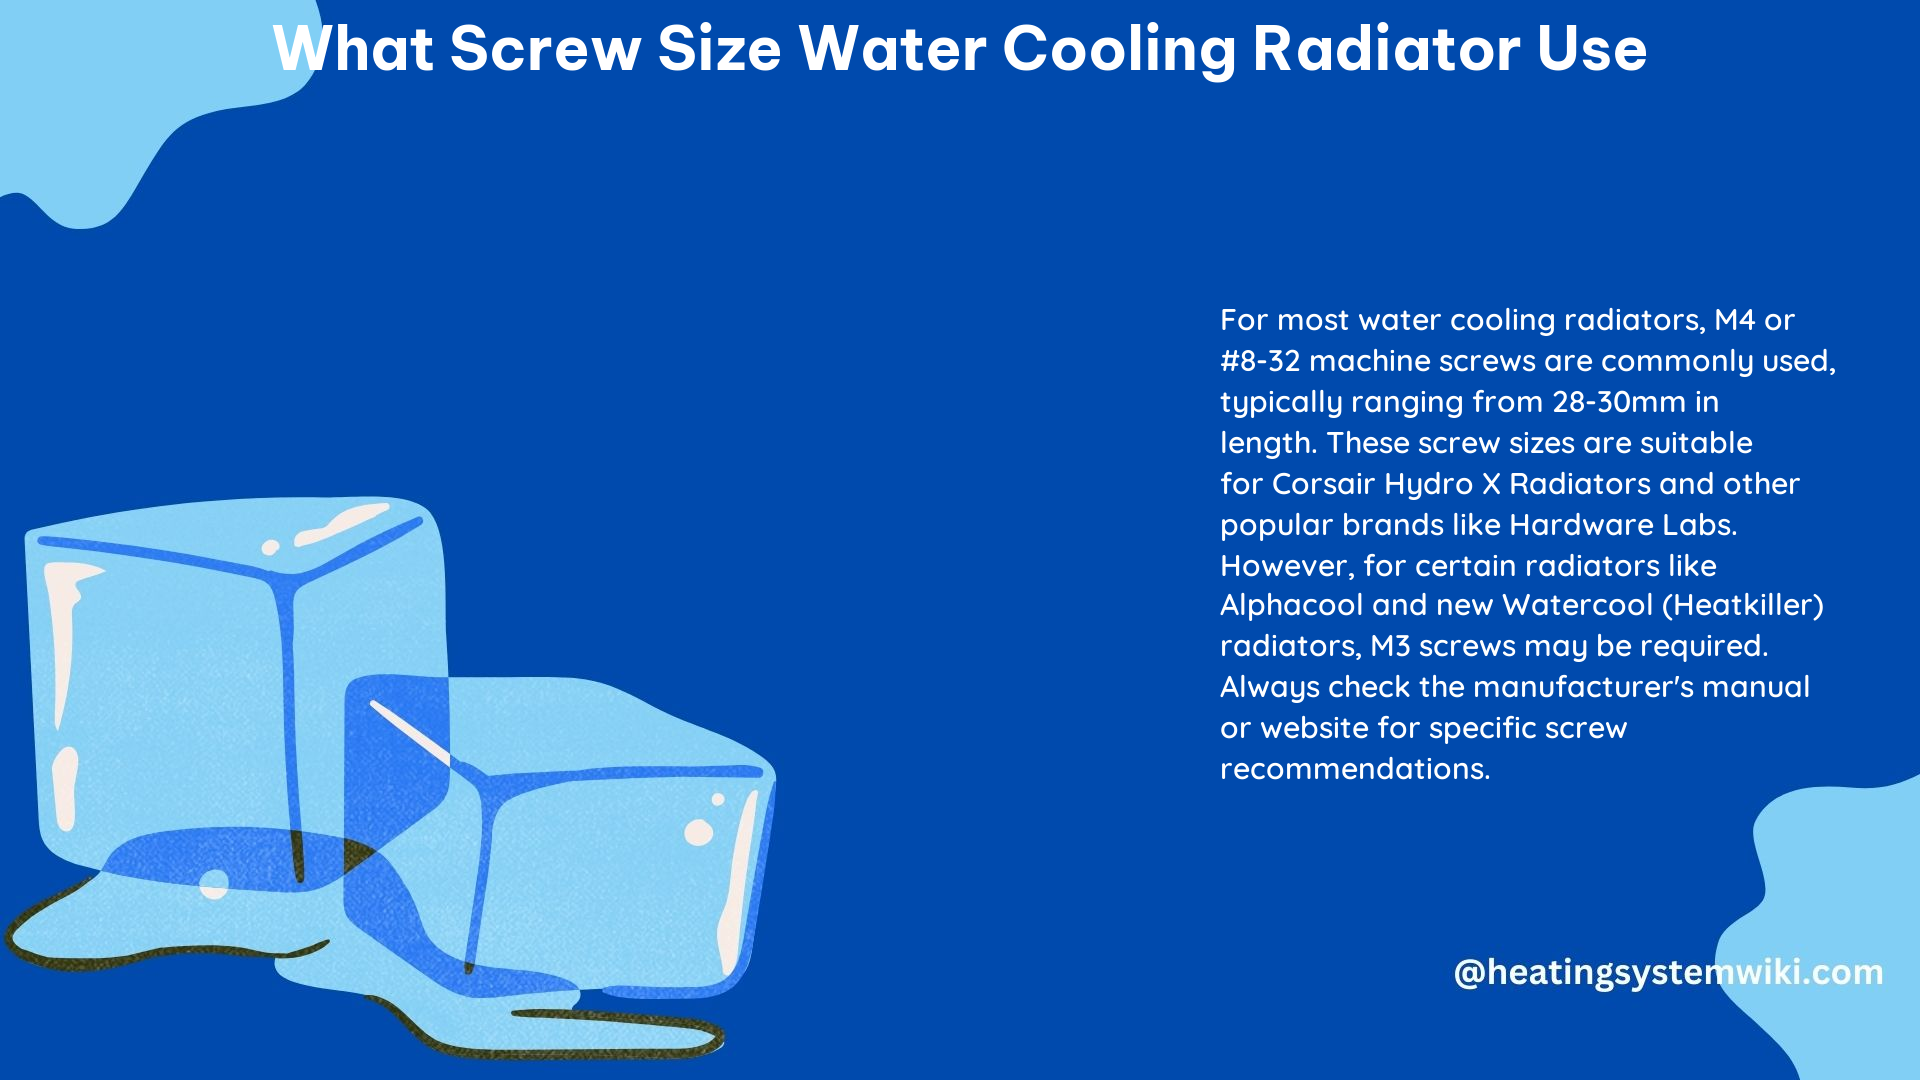 What Screw Size Water Cooling Radiator Use